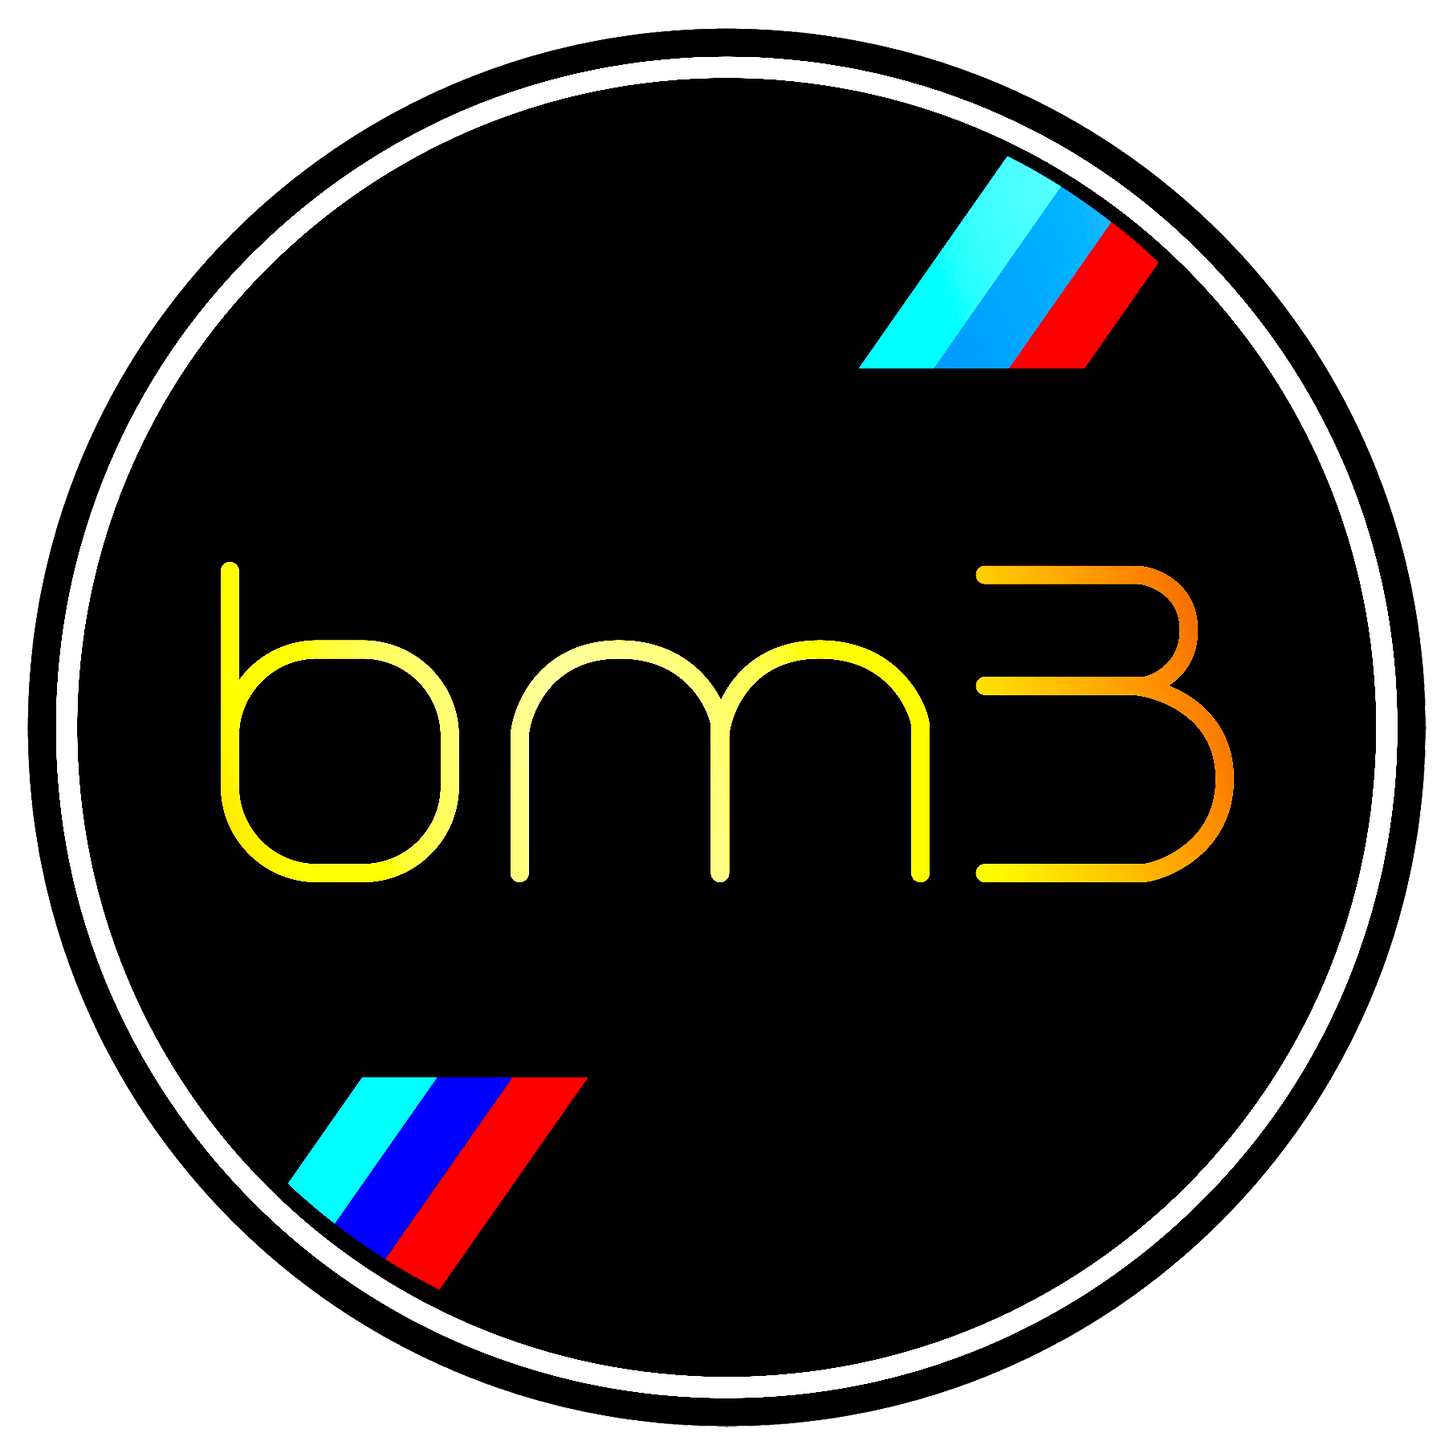 BOOTMOD3 BMW N63T2 G11 G12 G30 BM3 Remap/Tuning License FREE ENET CABLE (M550 & 750I)